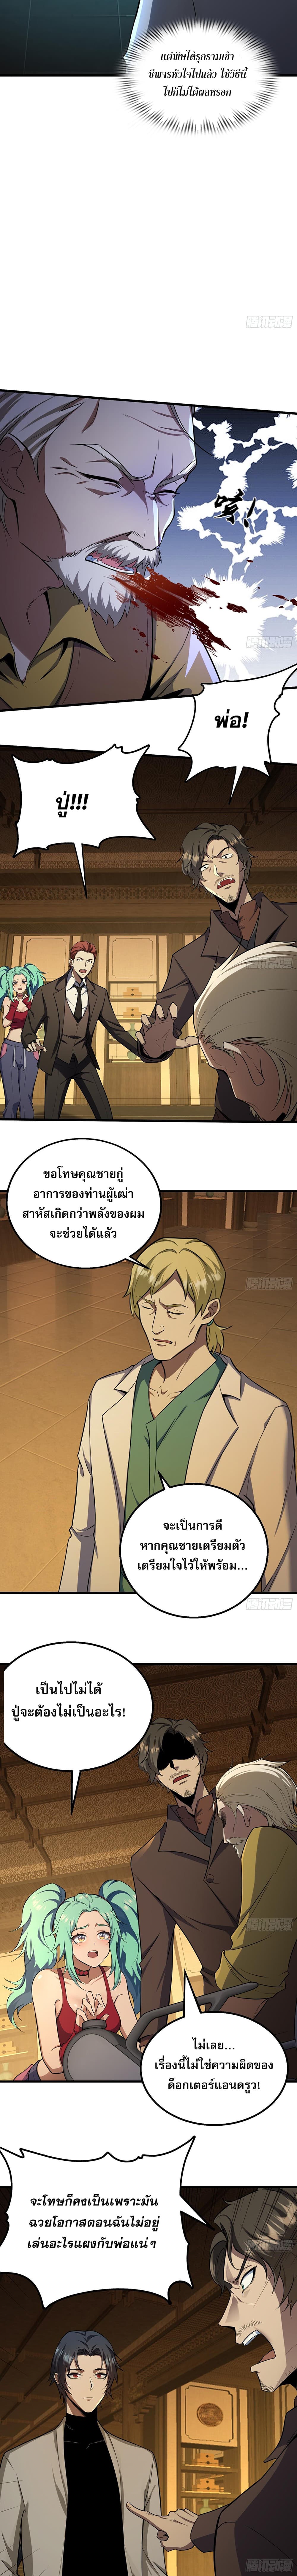 The All-Knowing Cultivator ผู้ฝึกตนผู้รอบรู้ 6/10